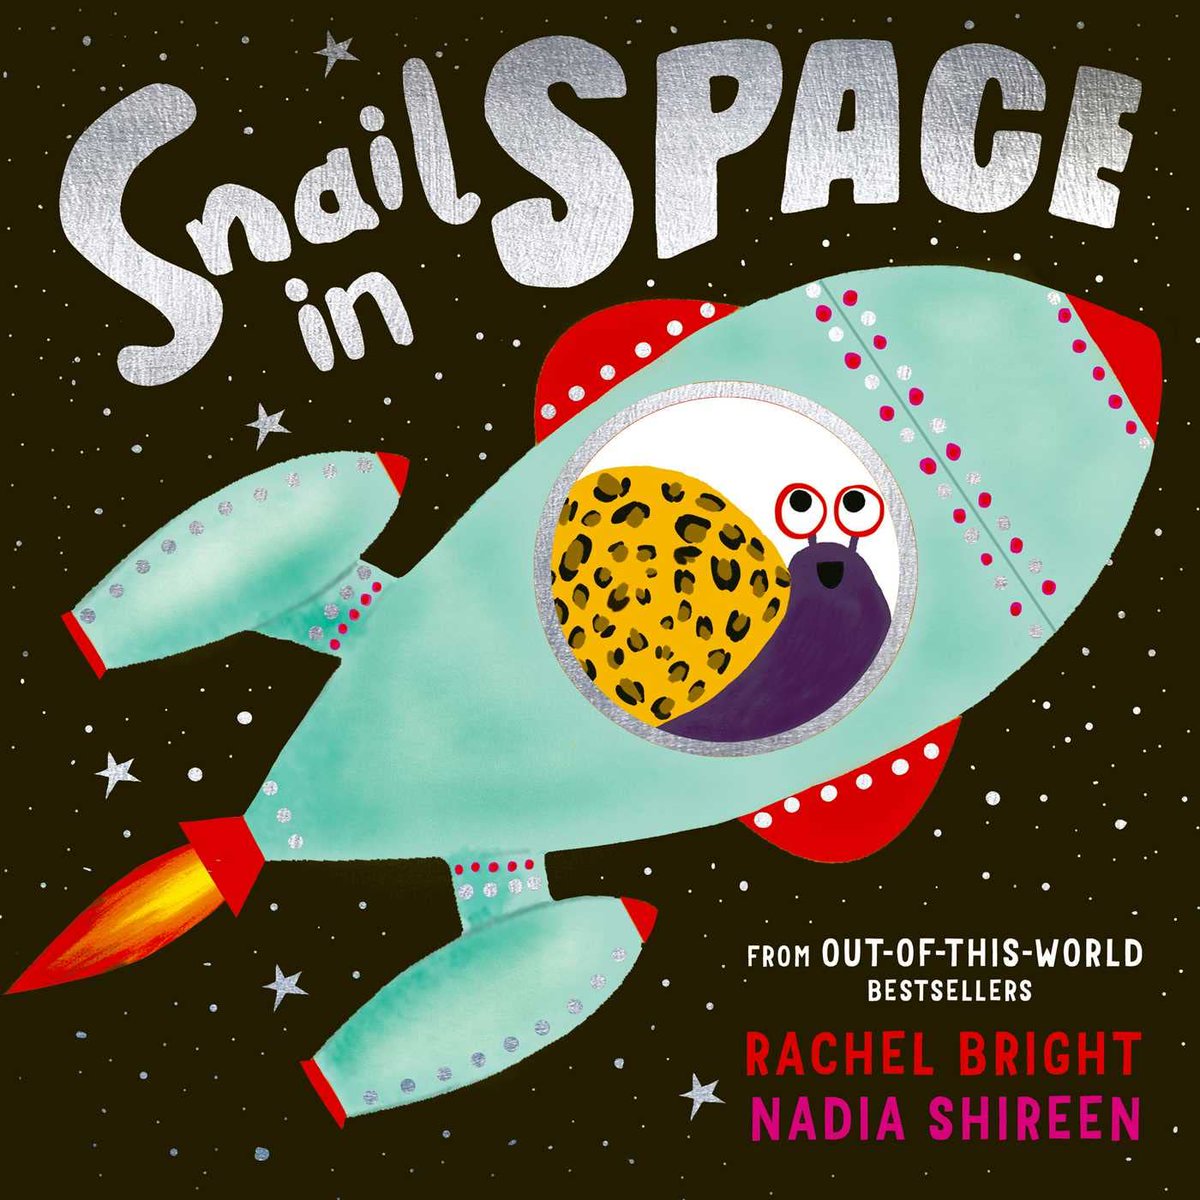 Get ready for an interSHELLar adventure! Gail the snail dreams of being the first snail in space. This hilarious story will teach children that with enough purpose, passion and persistence, they can achieve anything! Reserve here cwac.co/eBVE1